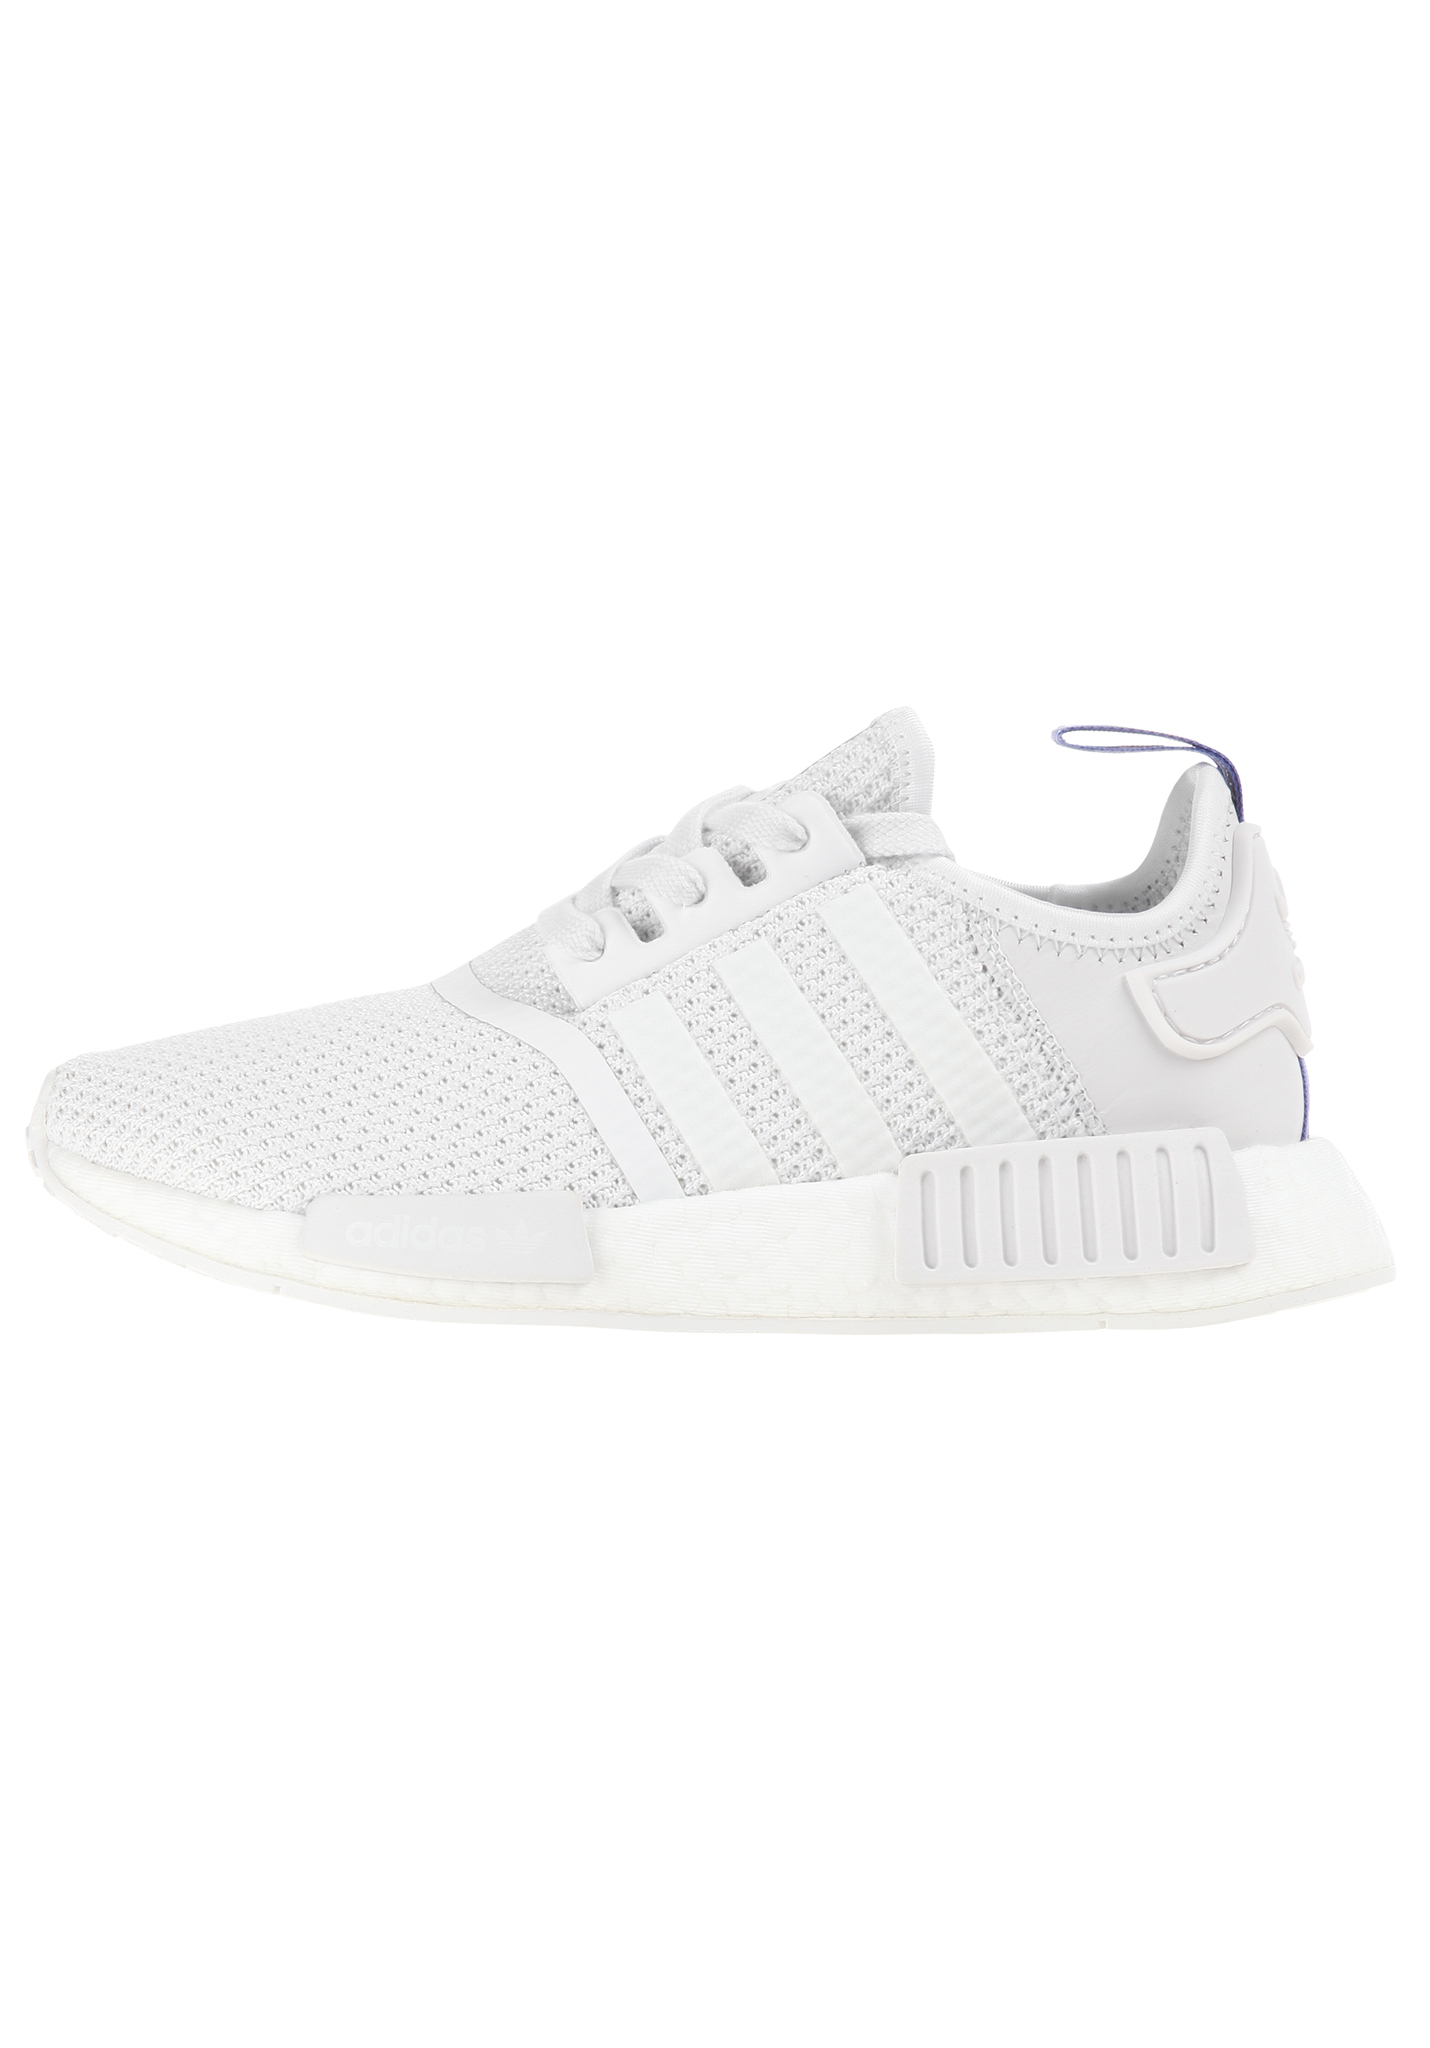 Adidas Originals NMD_R1 Sneaker Low crystal white/crystal white/real lilac 41 1/3